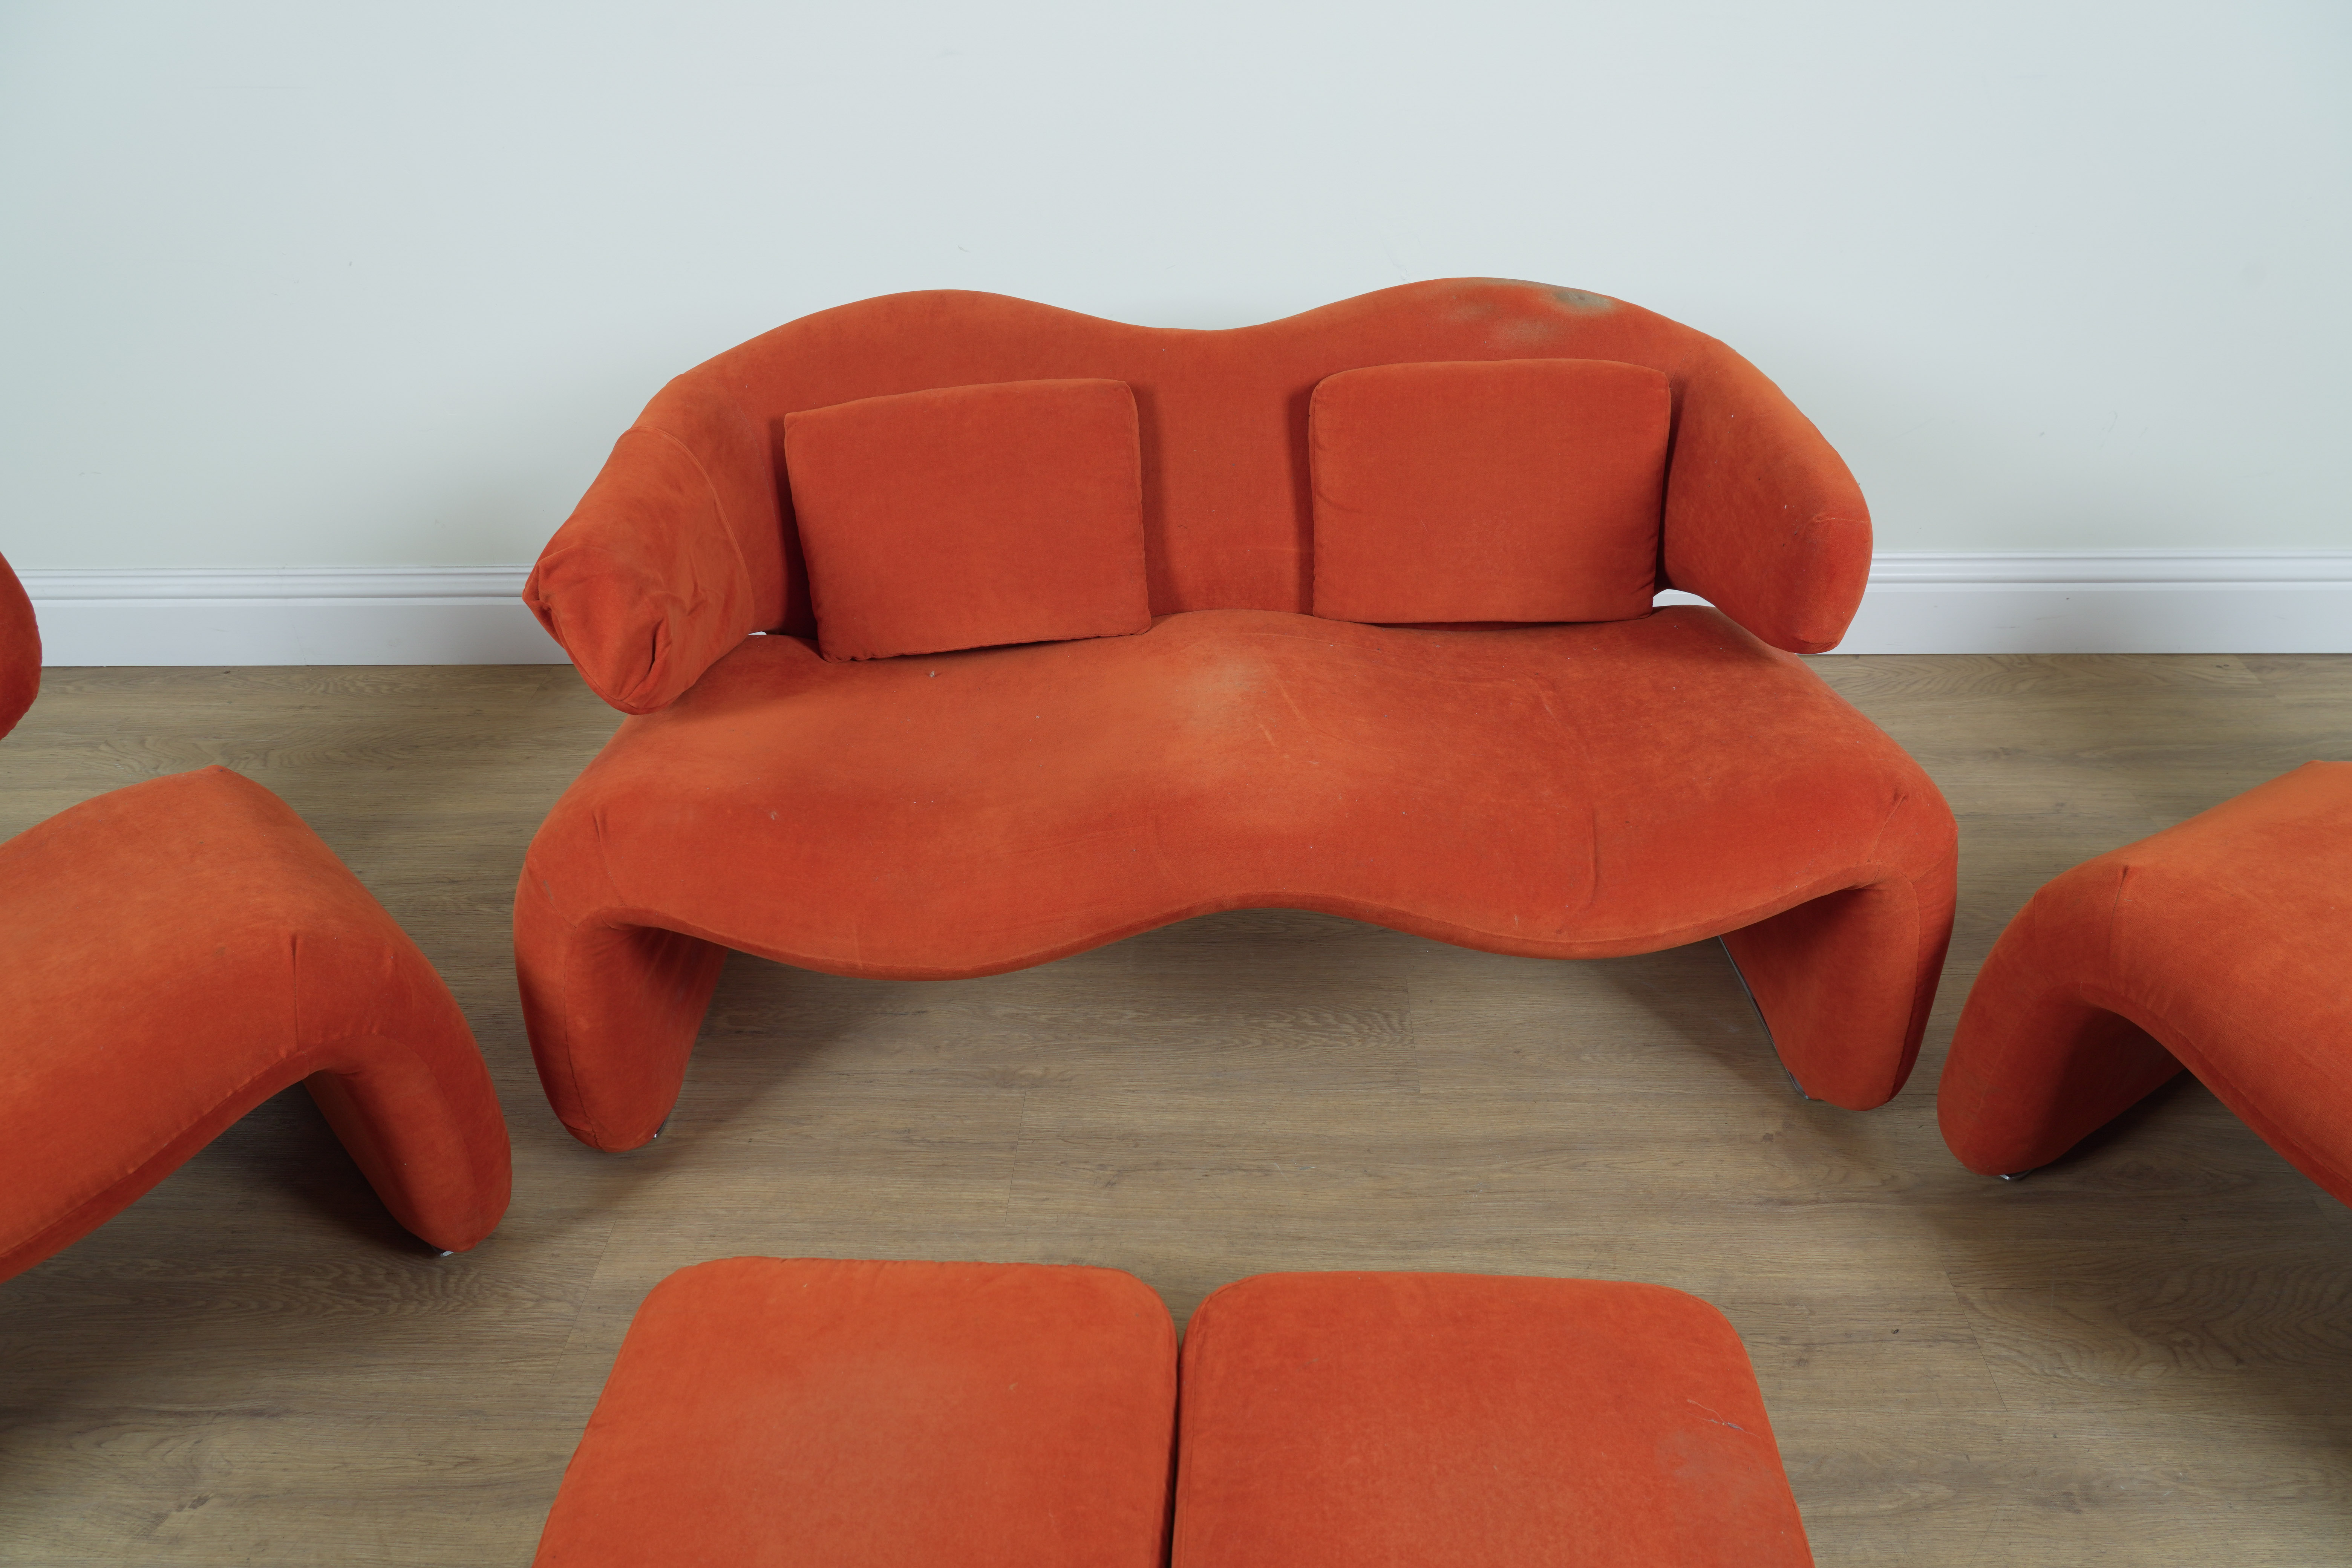 PROBABLY OLIVIER MOURGUE; AN ORANGE UPHOLSTERED SOFA AND CHAIRS (5) - Image 9 of 11